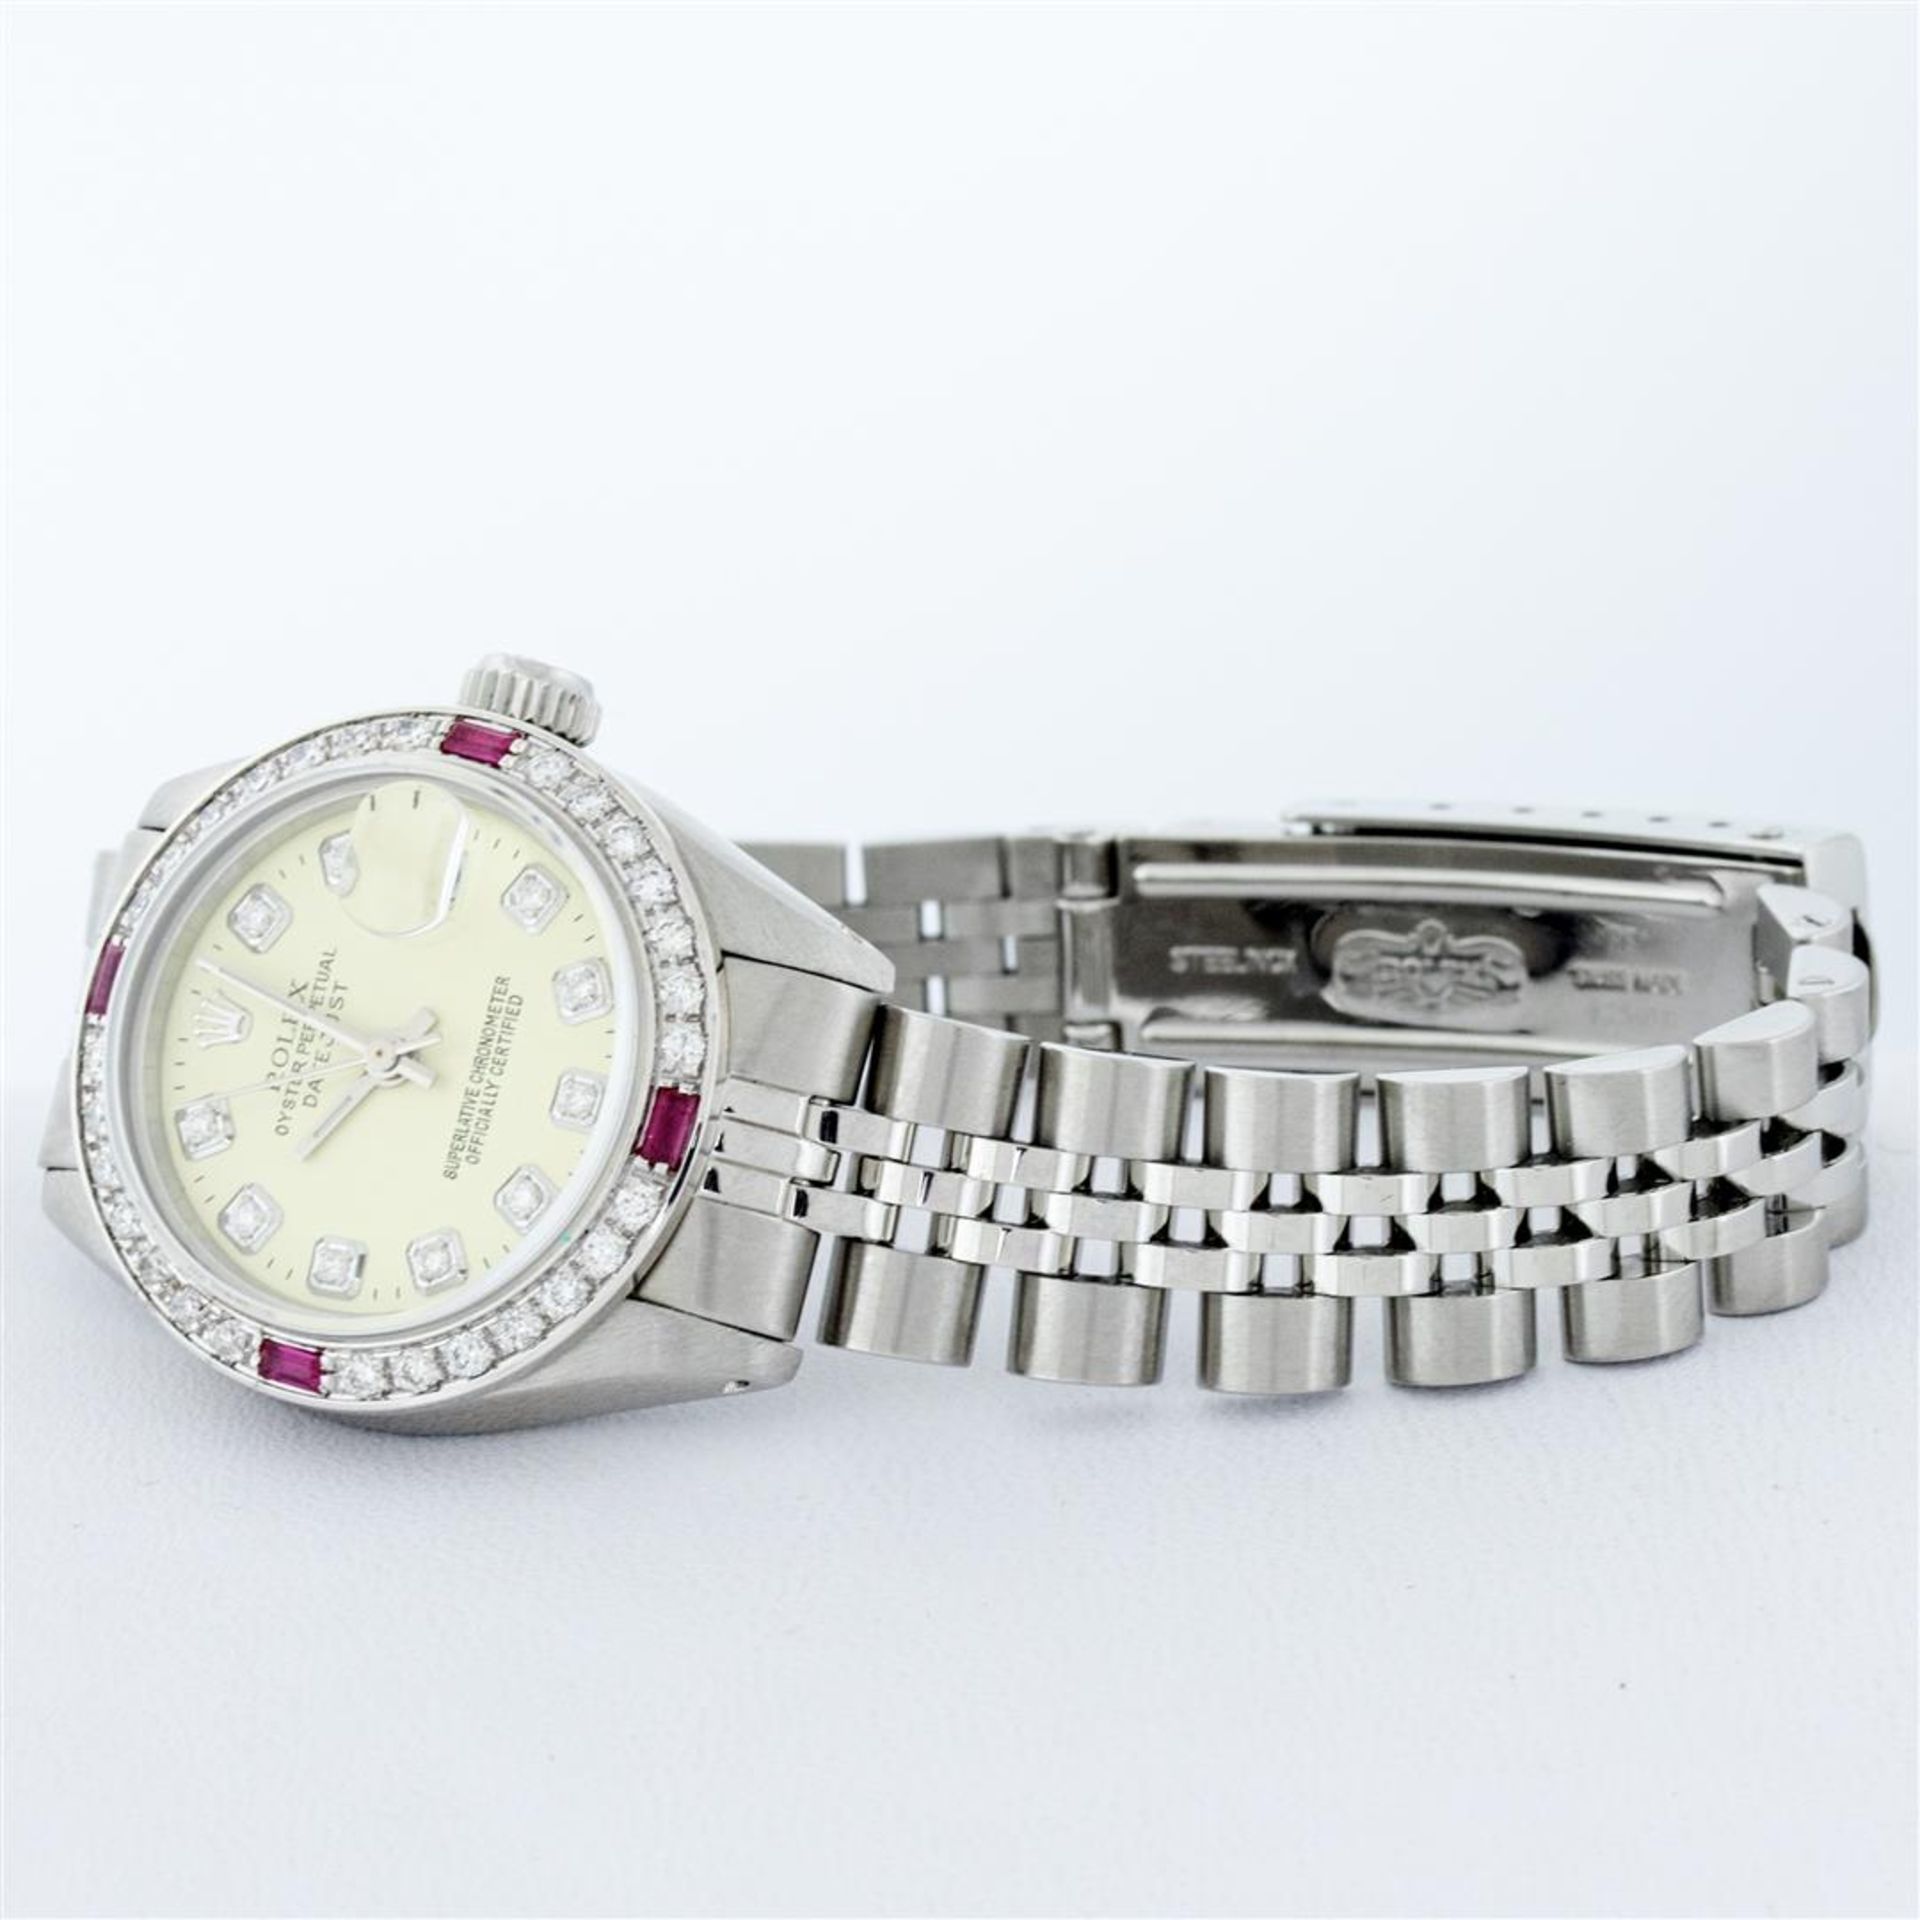 Rolex Ladies Stainless Steel Yellow Diamond & Ruby 26MM Datejust Wristwatch - Image 5 of 9